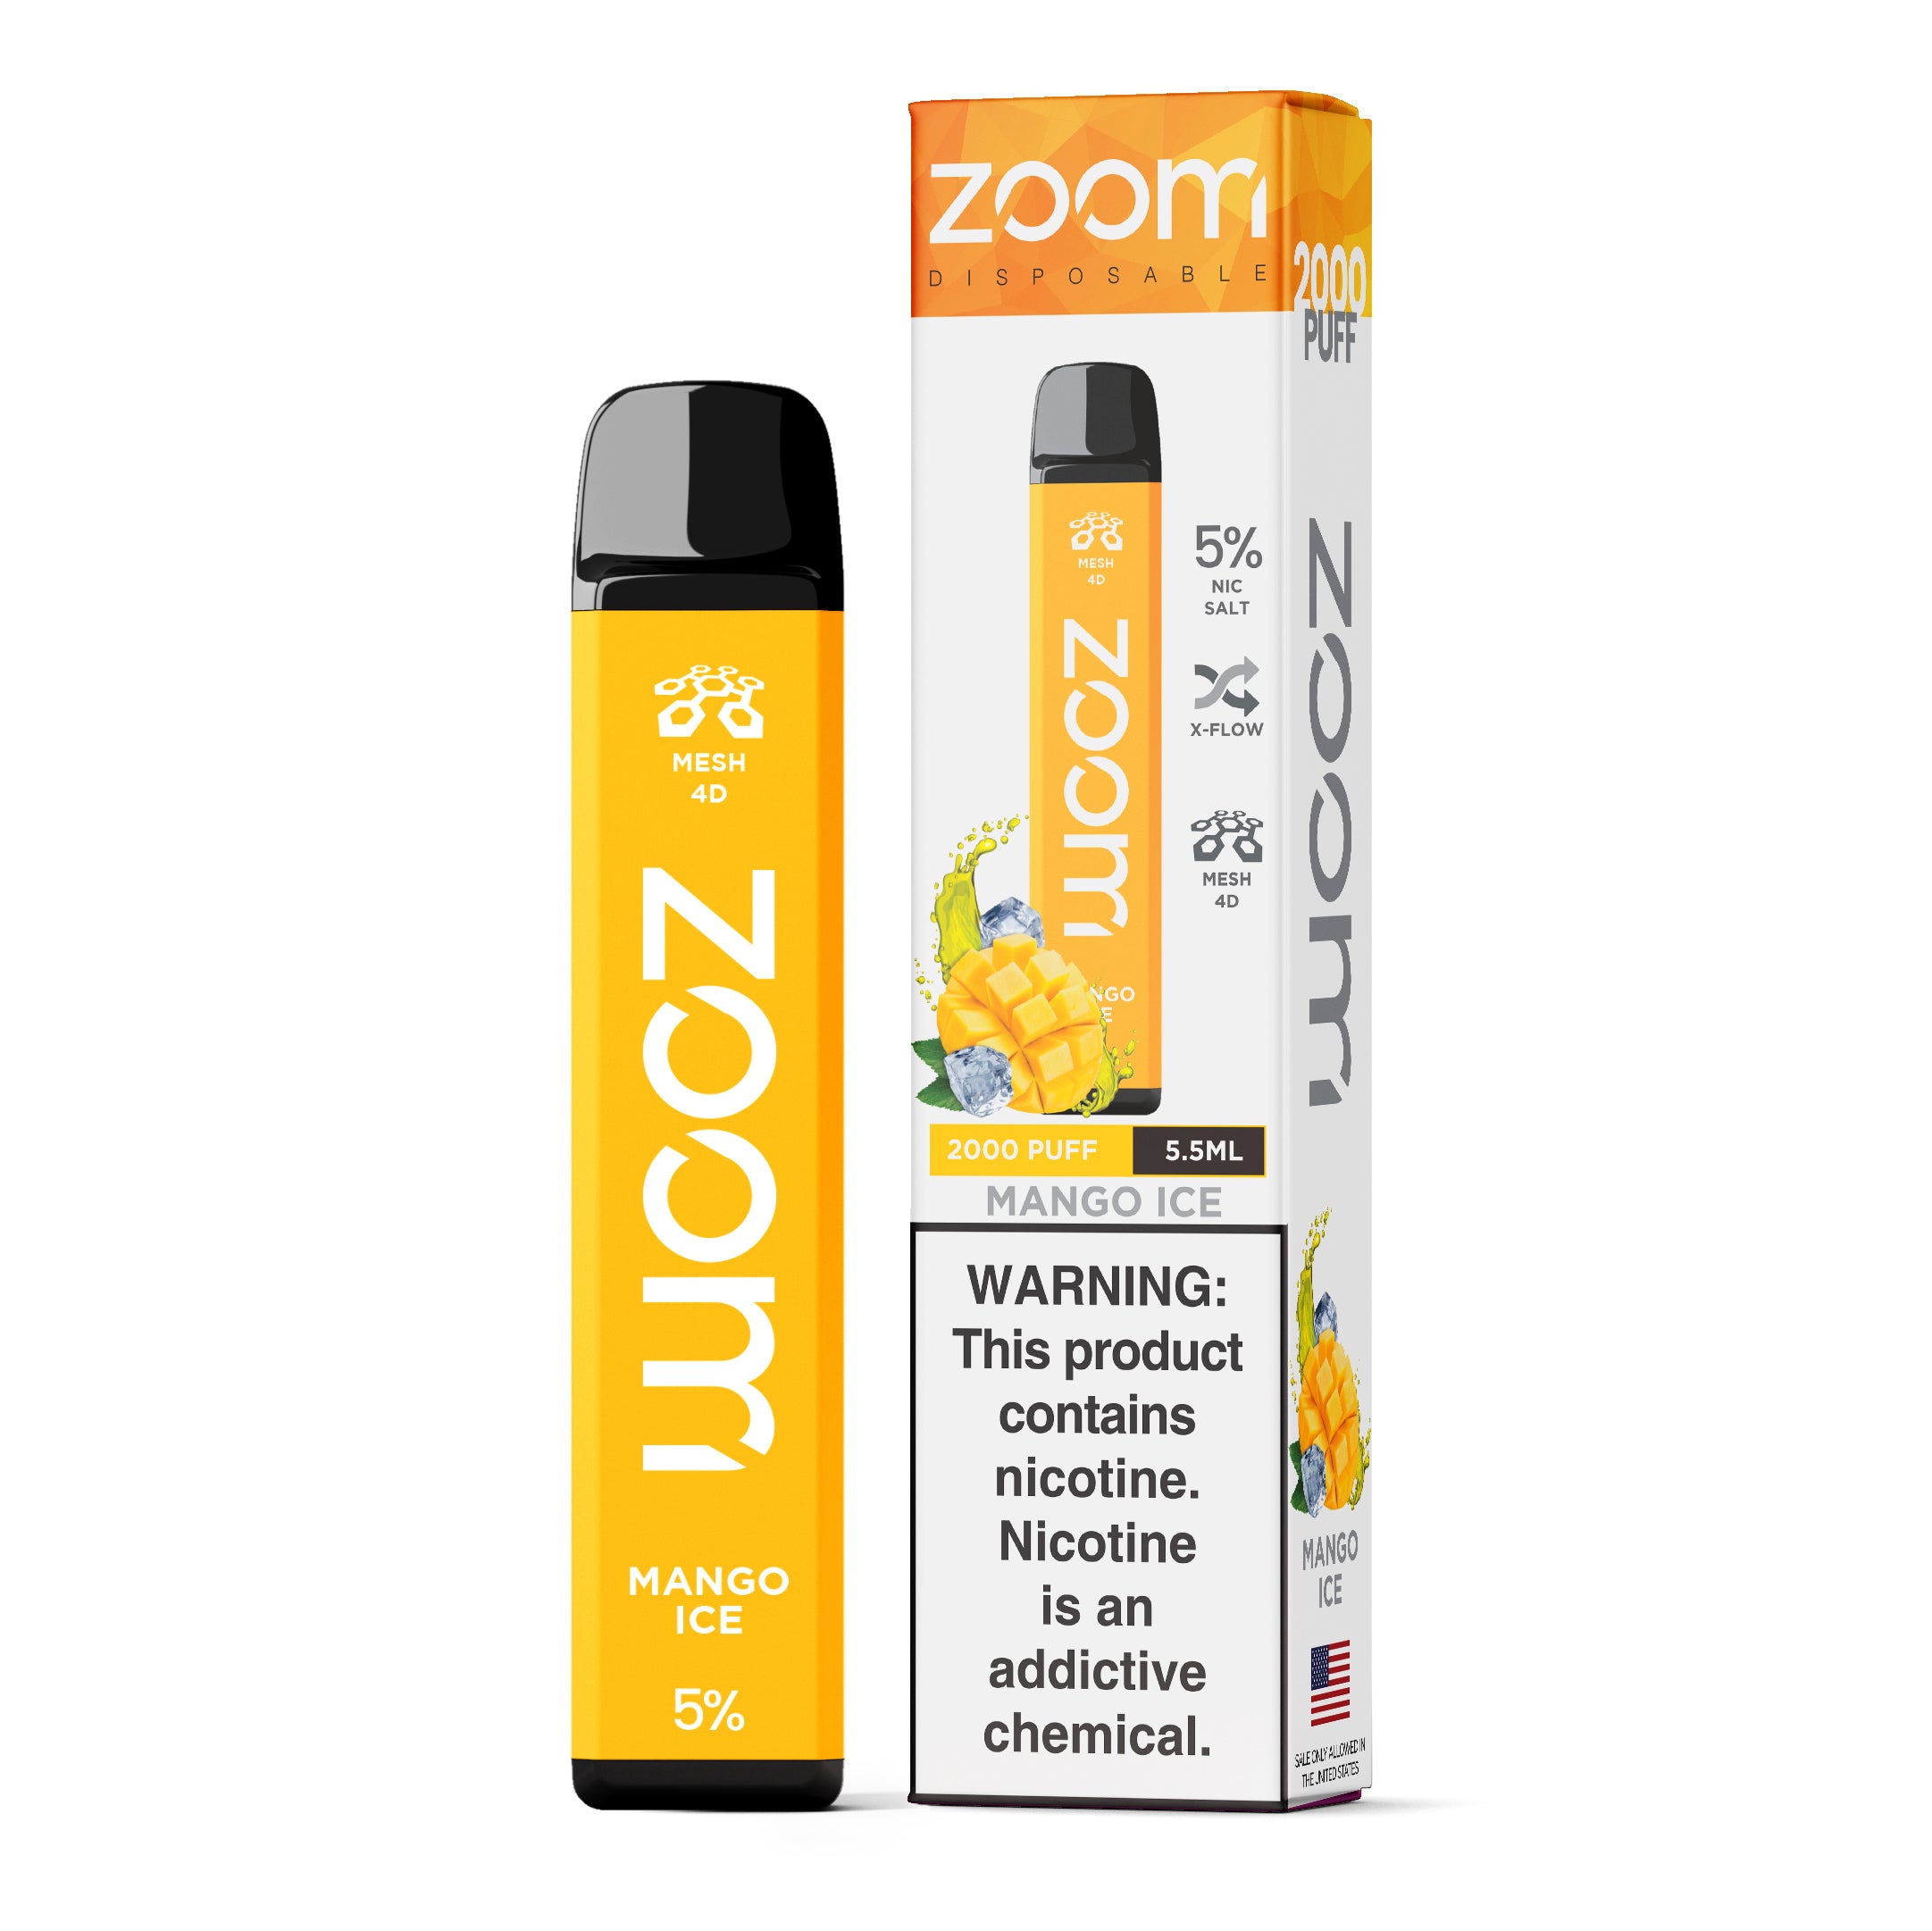 Zoom Disposable | 2000 Puffs | 5.5mL Mango Ice with packaging